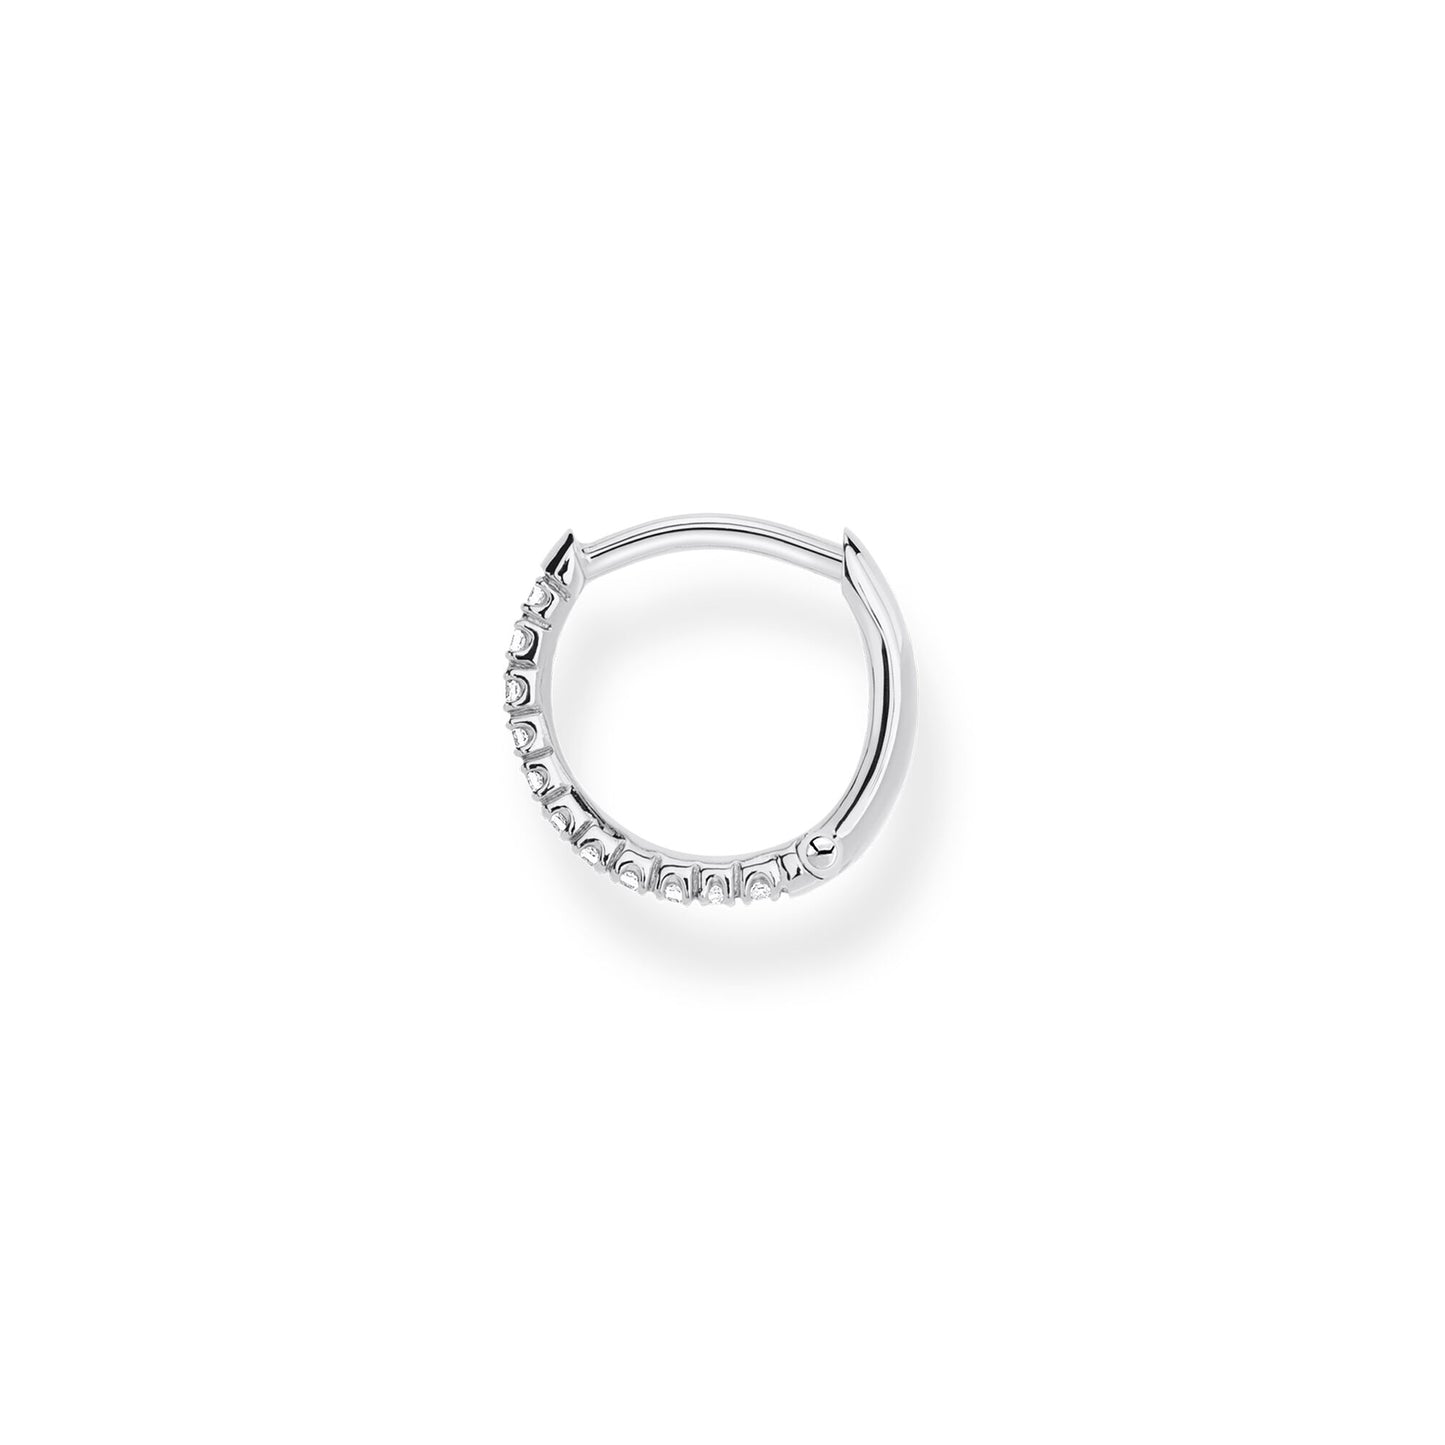 CHARMING COLLECTION 13.5MM CZ HOOP EARRING SINGLE